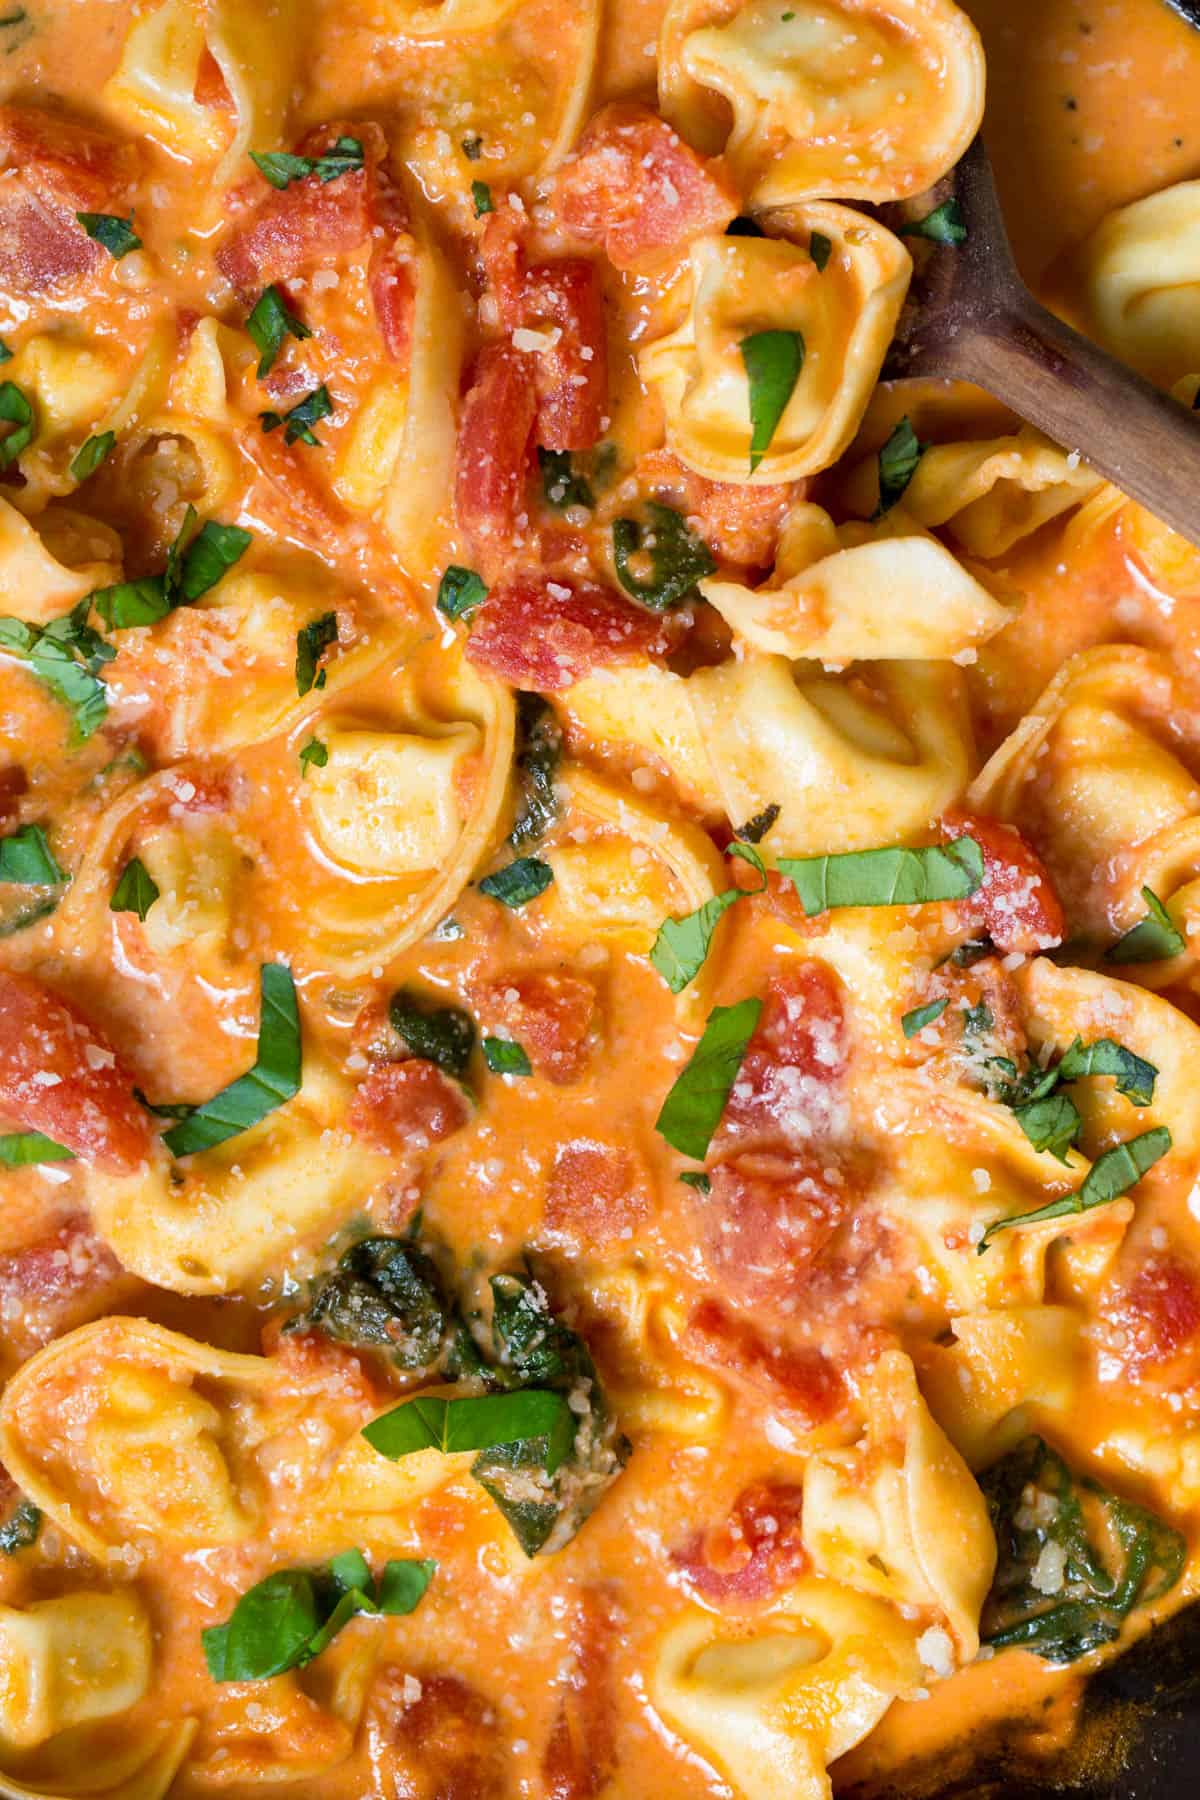 A close up photo of the creamy tortellini pasta in a skillet for serving.